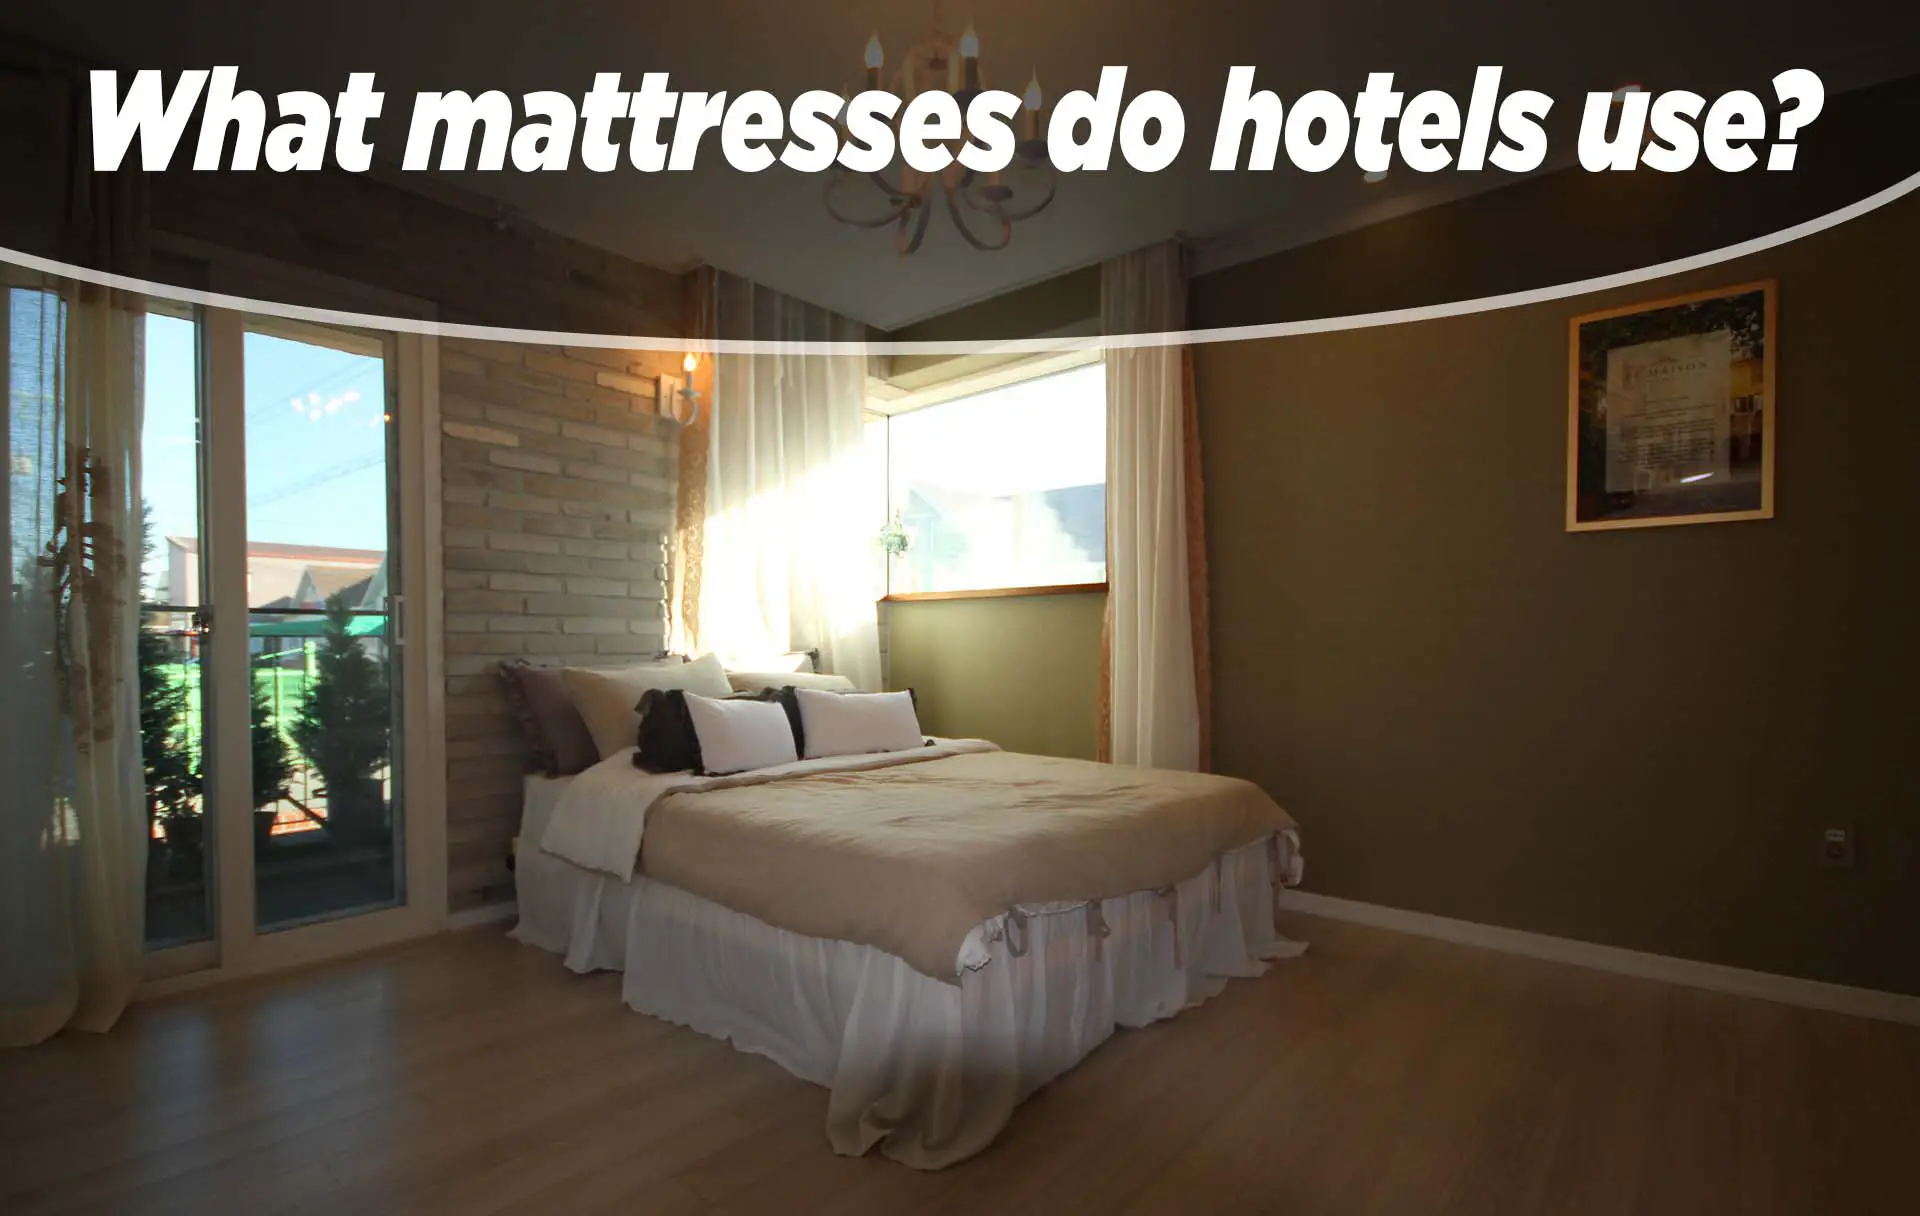 What mattresses do hotels use?